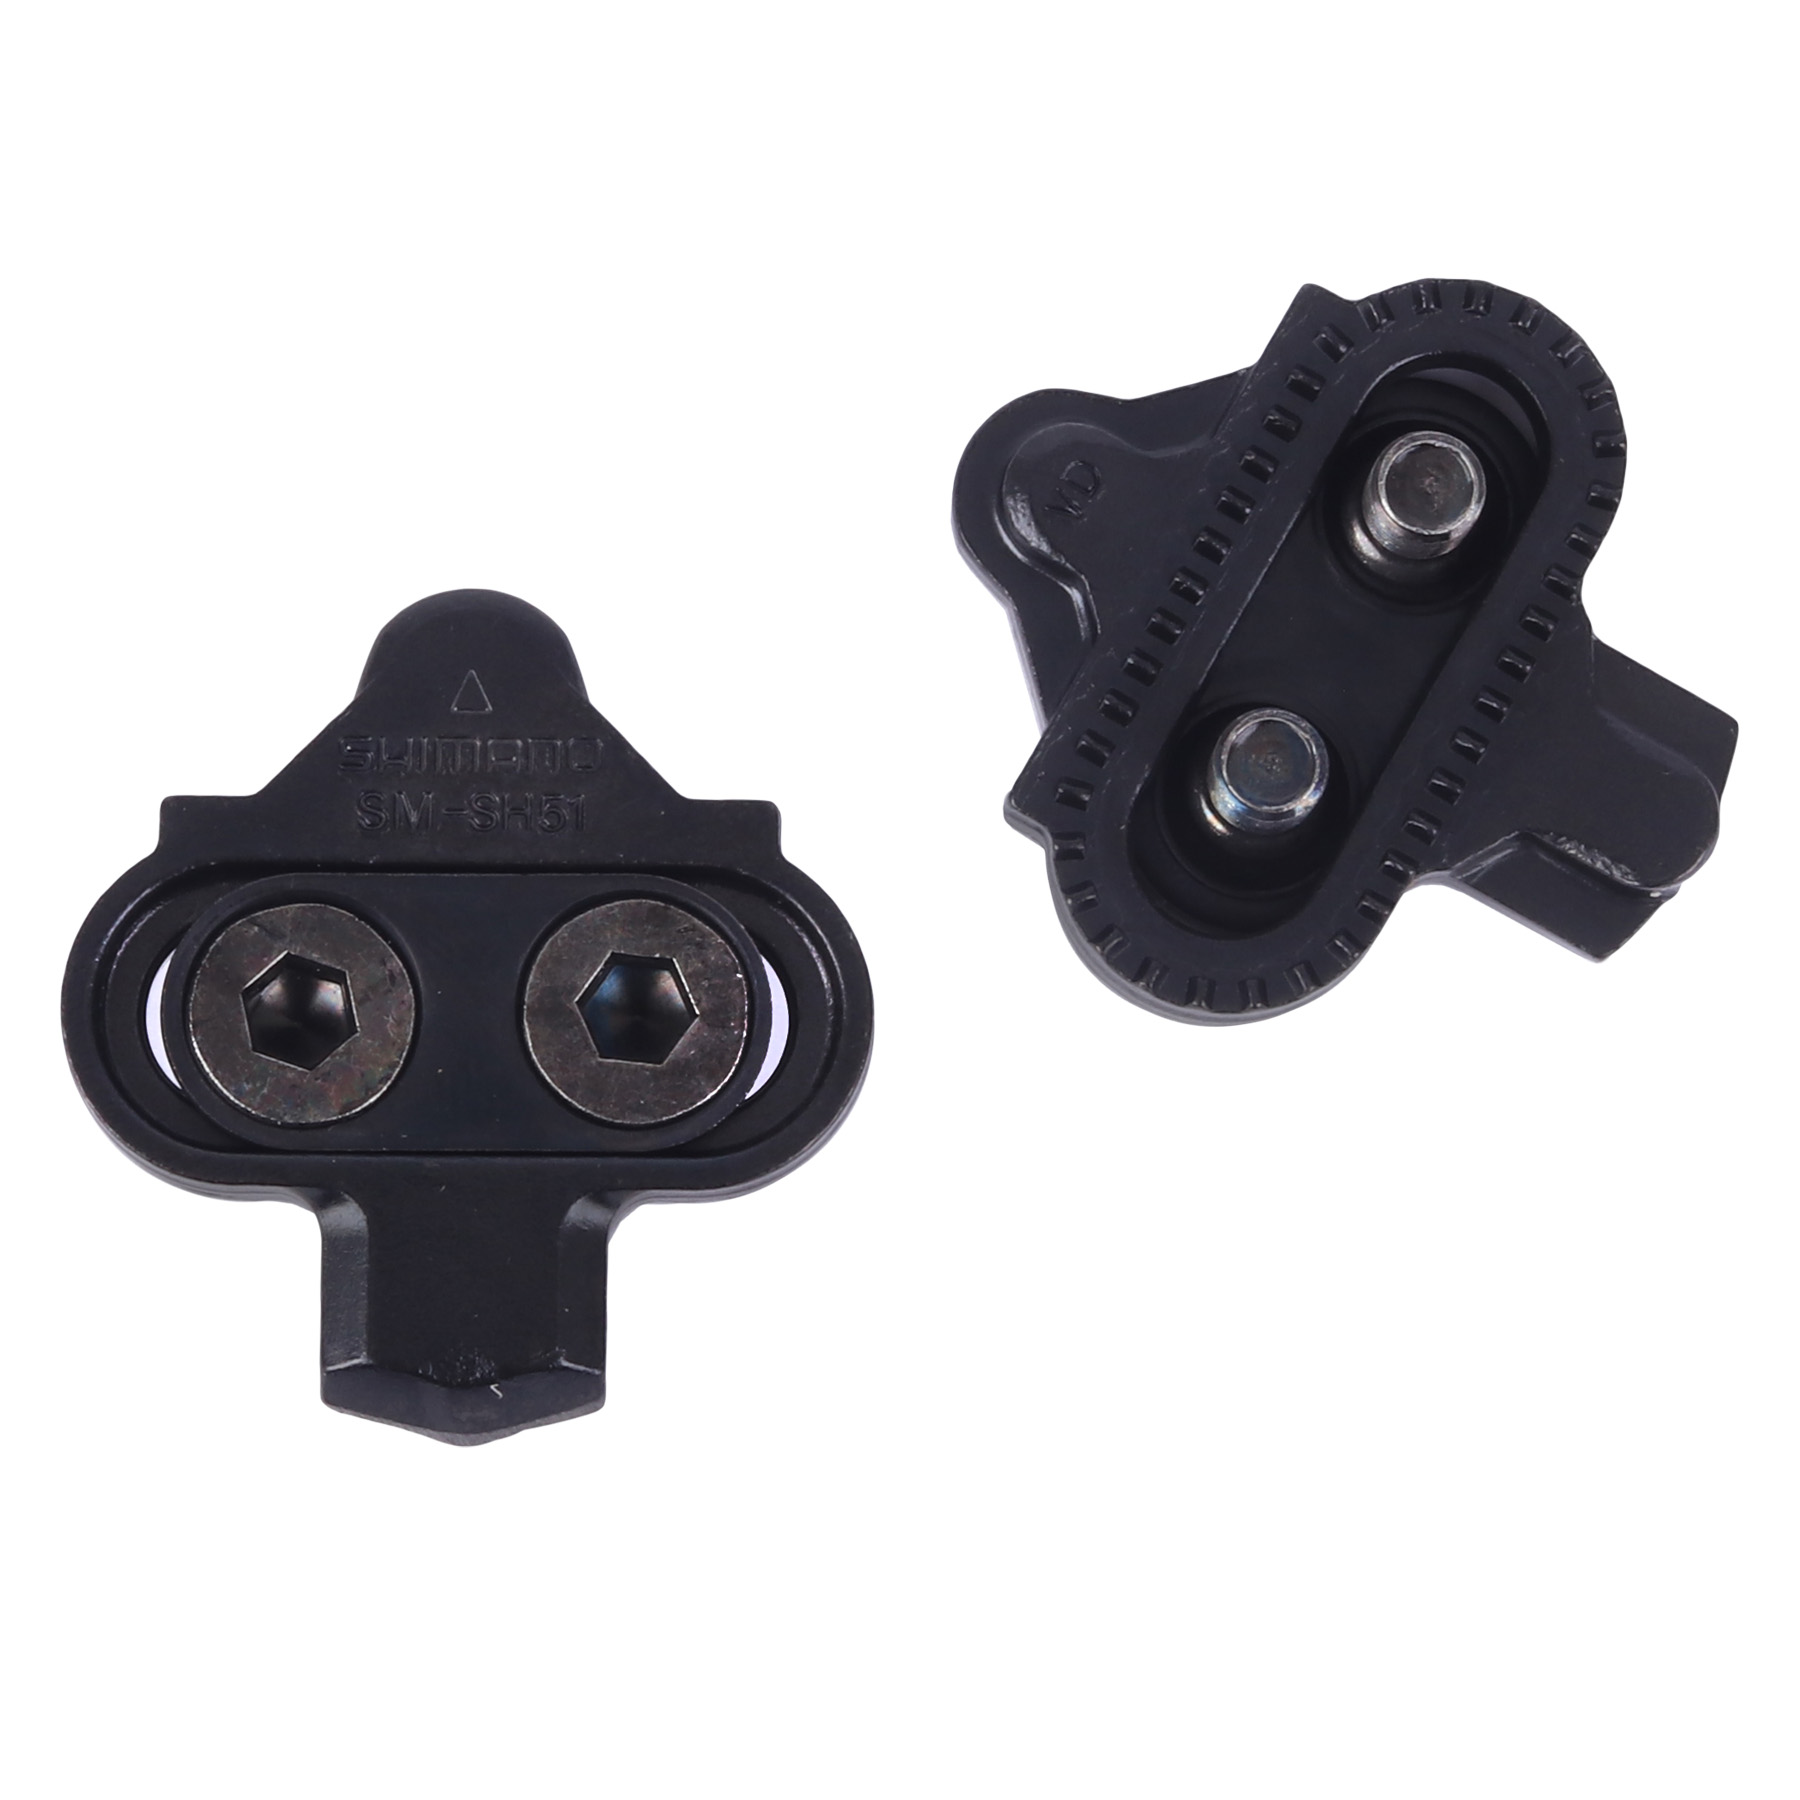 Image of Shimano SM-SH51 SPD Cleats without Cleat Nut - black